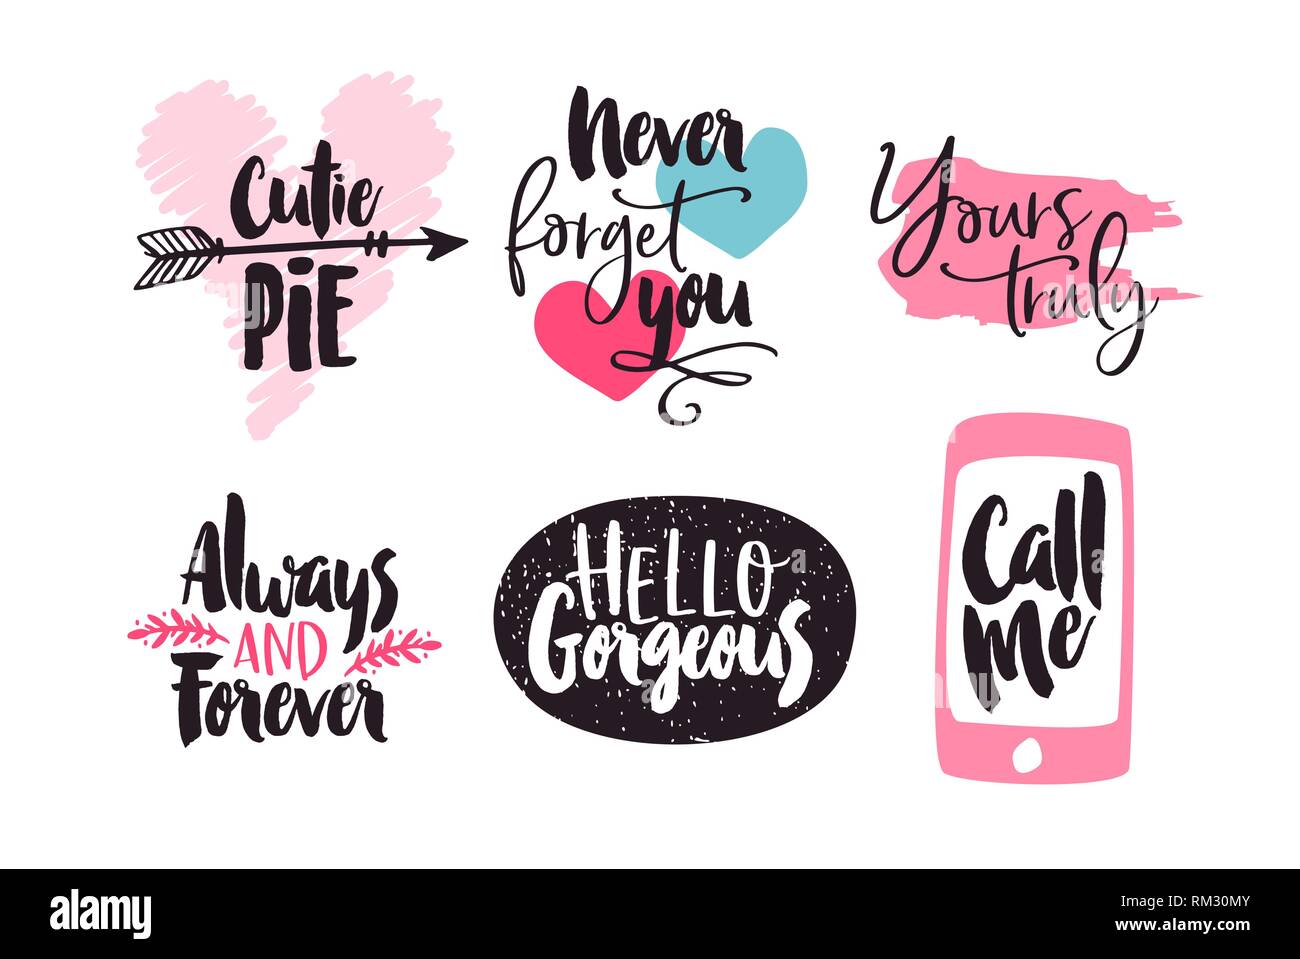 Valentines Day Calligraphy Text Quote Collection Set Of Hand Drawn Pink Typography Doodles With Cute Love Messages On Isolated White Background Stock Vector Image Art Alamy